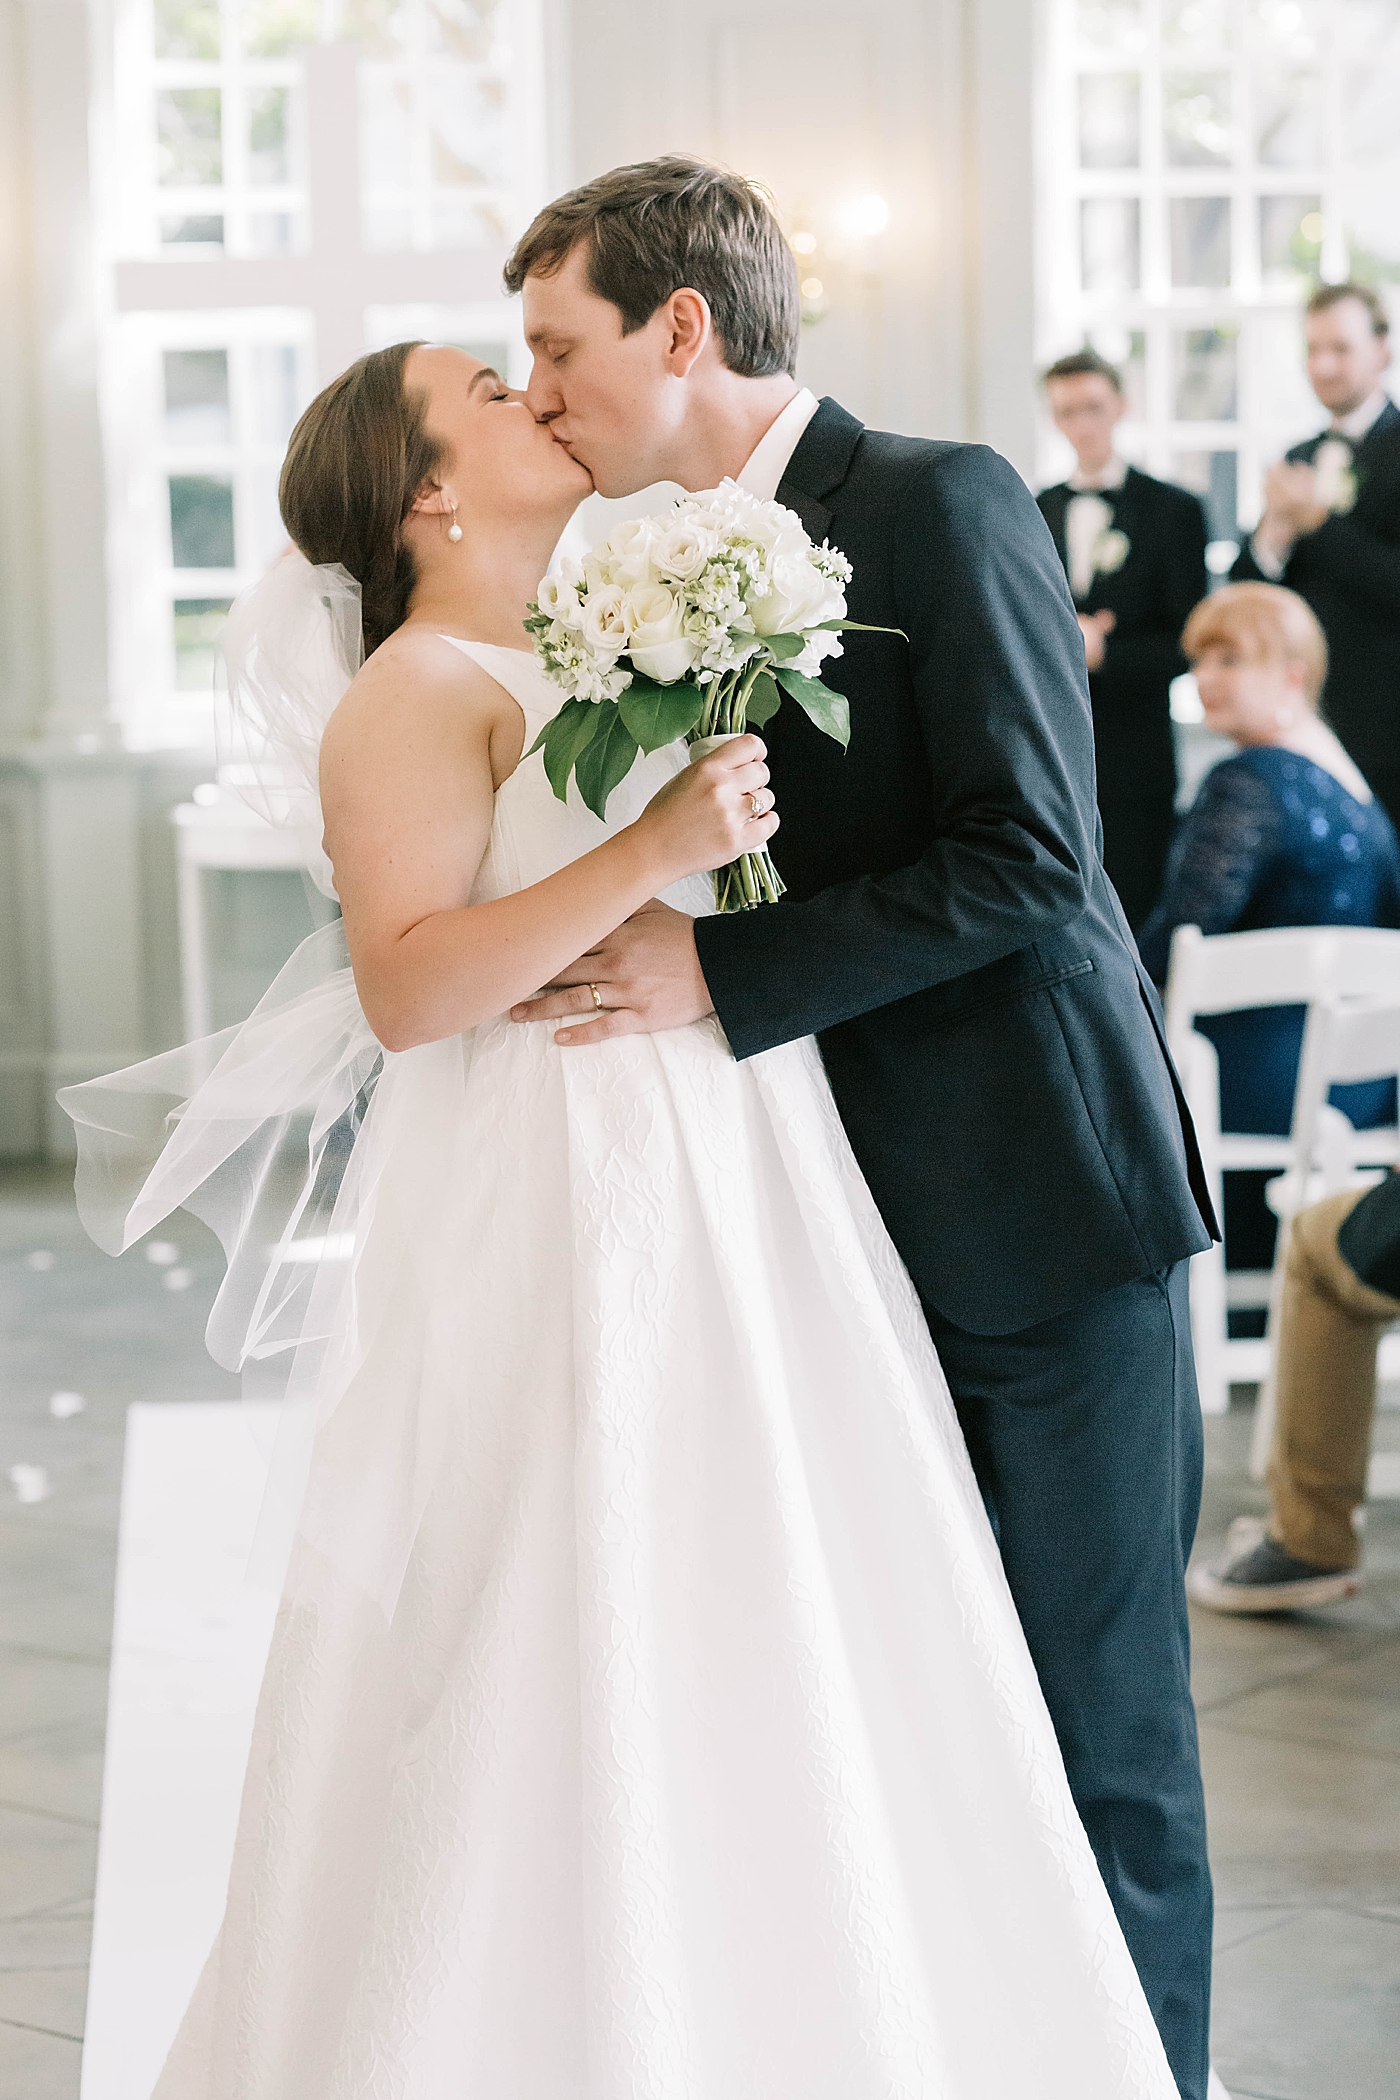 Bride and groom kiss walking down the aisle | Carters Event Co